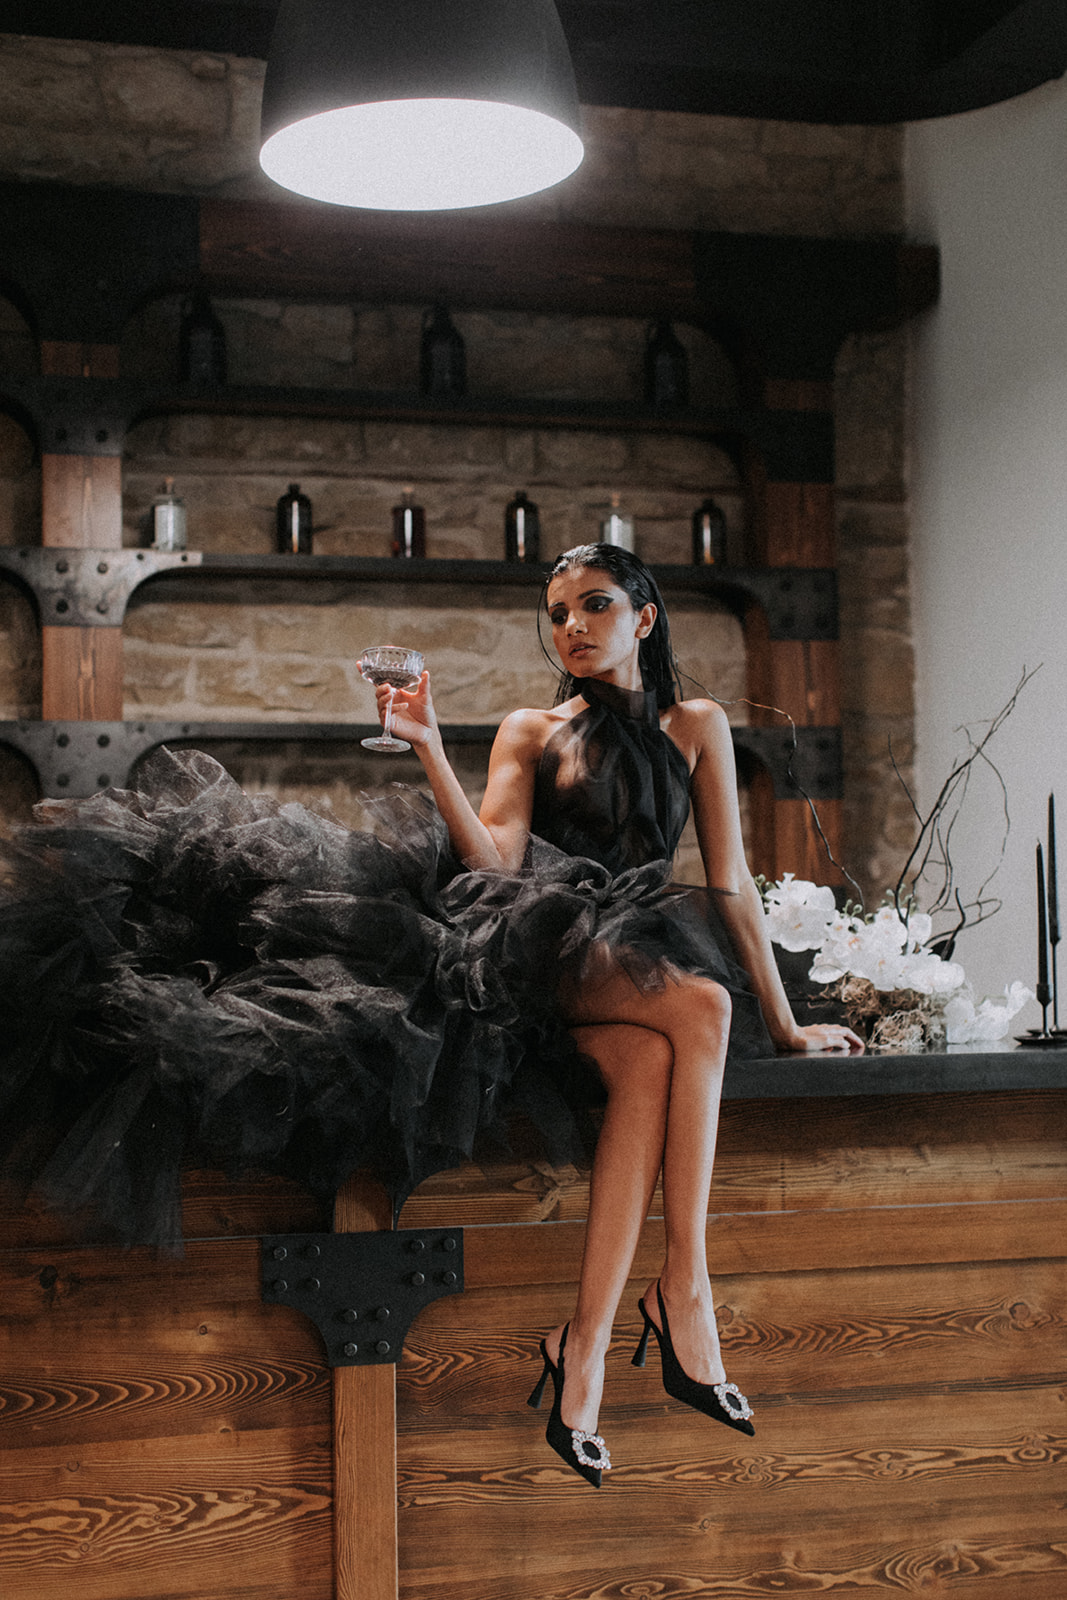 Modern & Moody All-Black Editorial at The Pioneer || featured on the Brontë Bride Blog || modern black alternative wedding inspiration in downtown Calgary Alberta at The Pioneer on 8th